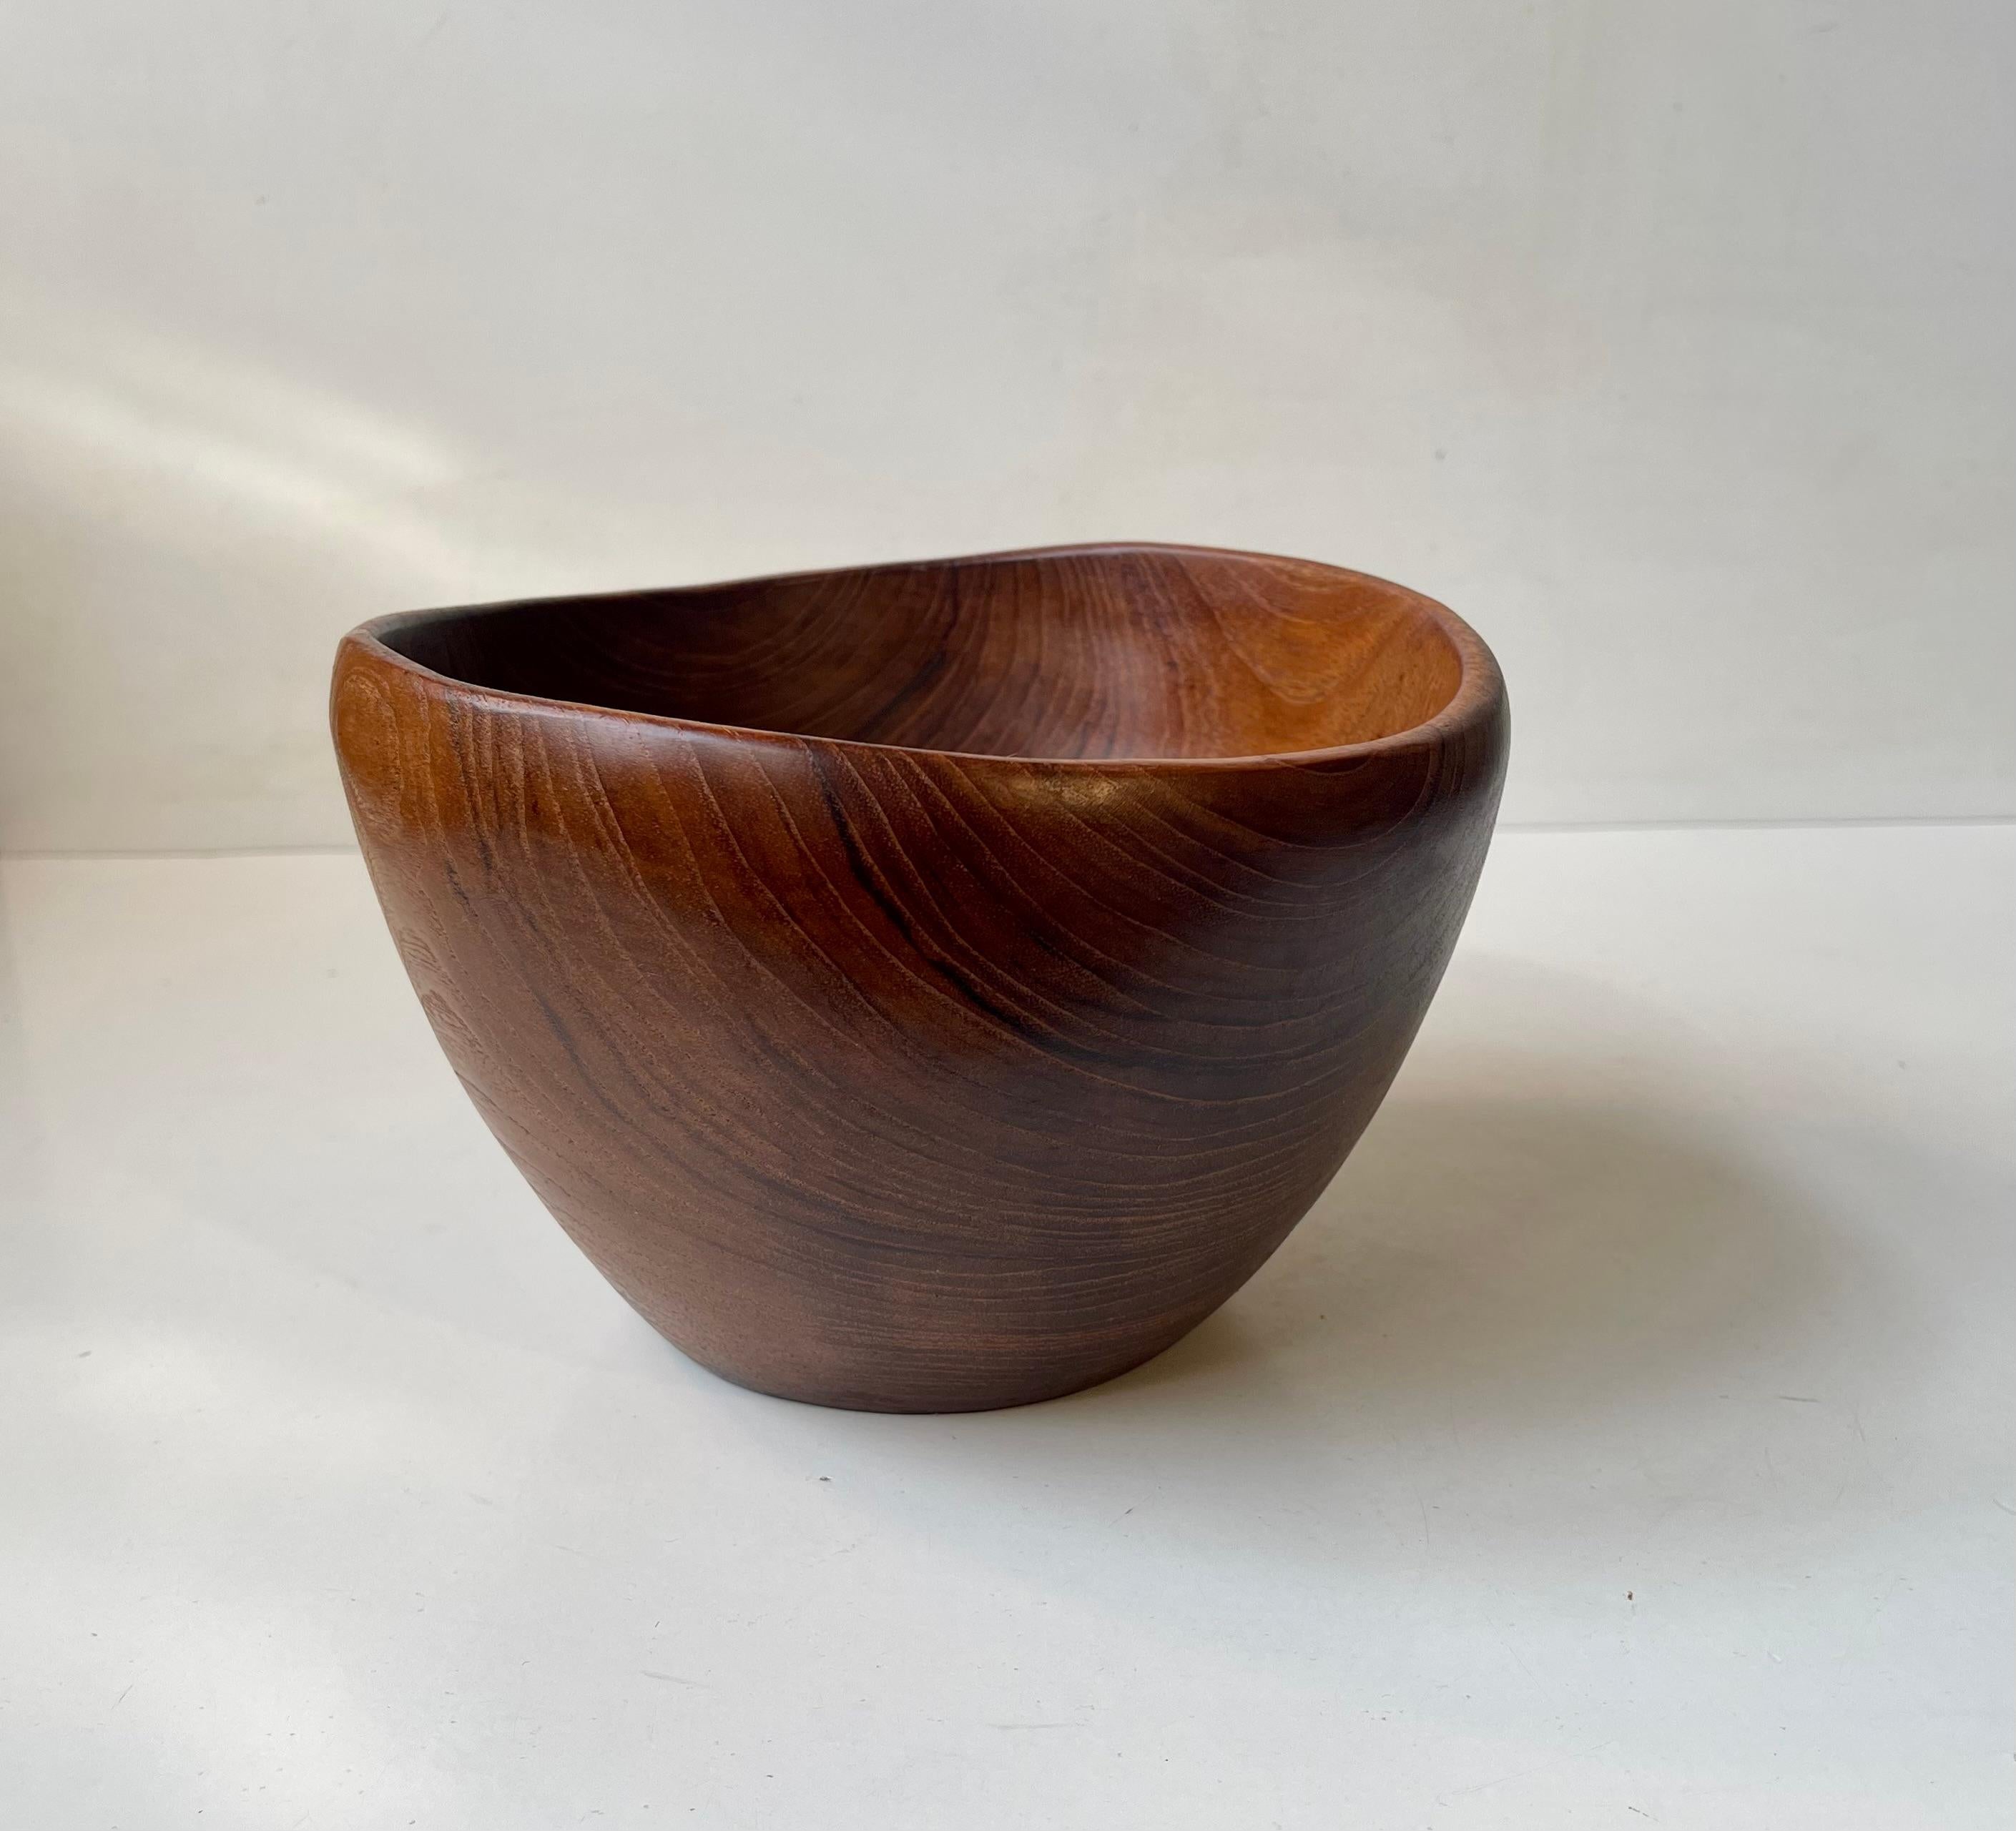 Unusual asymmetrical bowl in solid teak. Beautiful hand-finished organic shape with soft curves. Suitable as decorative centerpiece, for fruits or salad. It was made in-house at ESA Møbler in Denmark during the 1950s in a style reminiscent of Finn